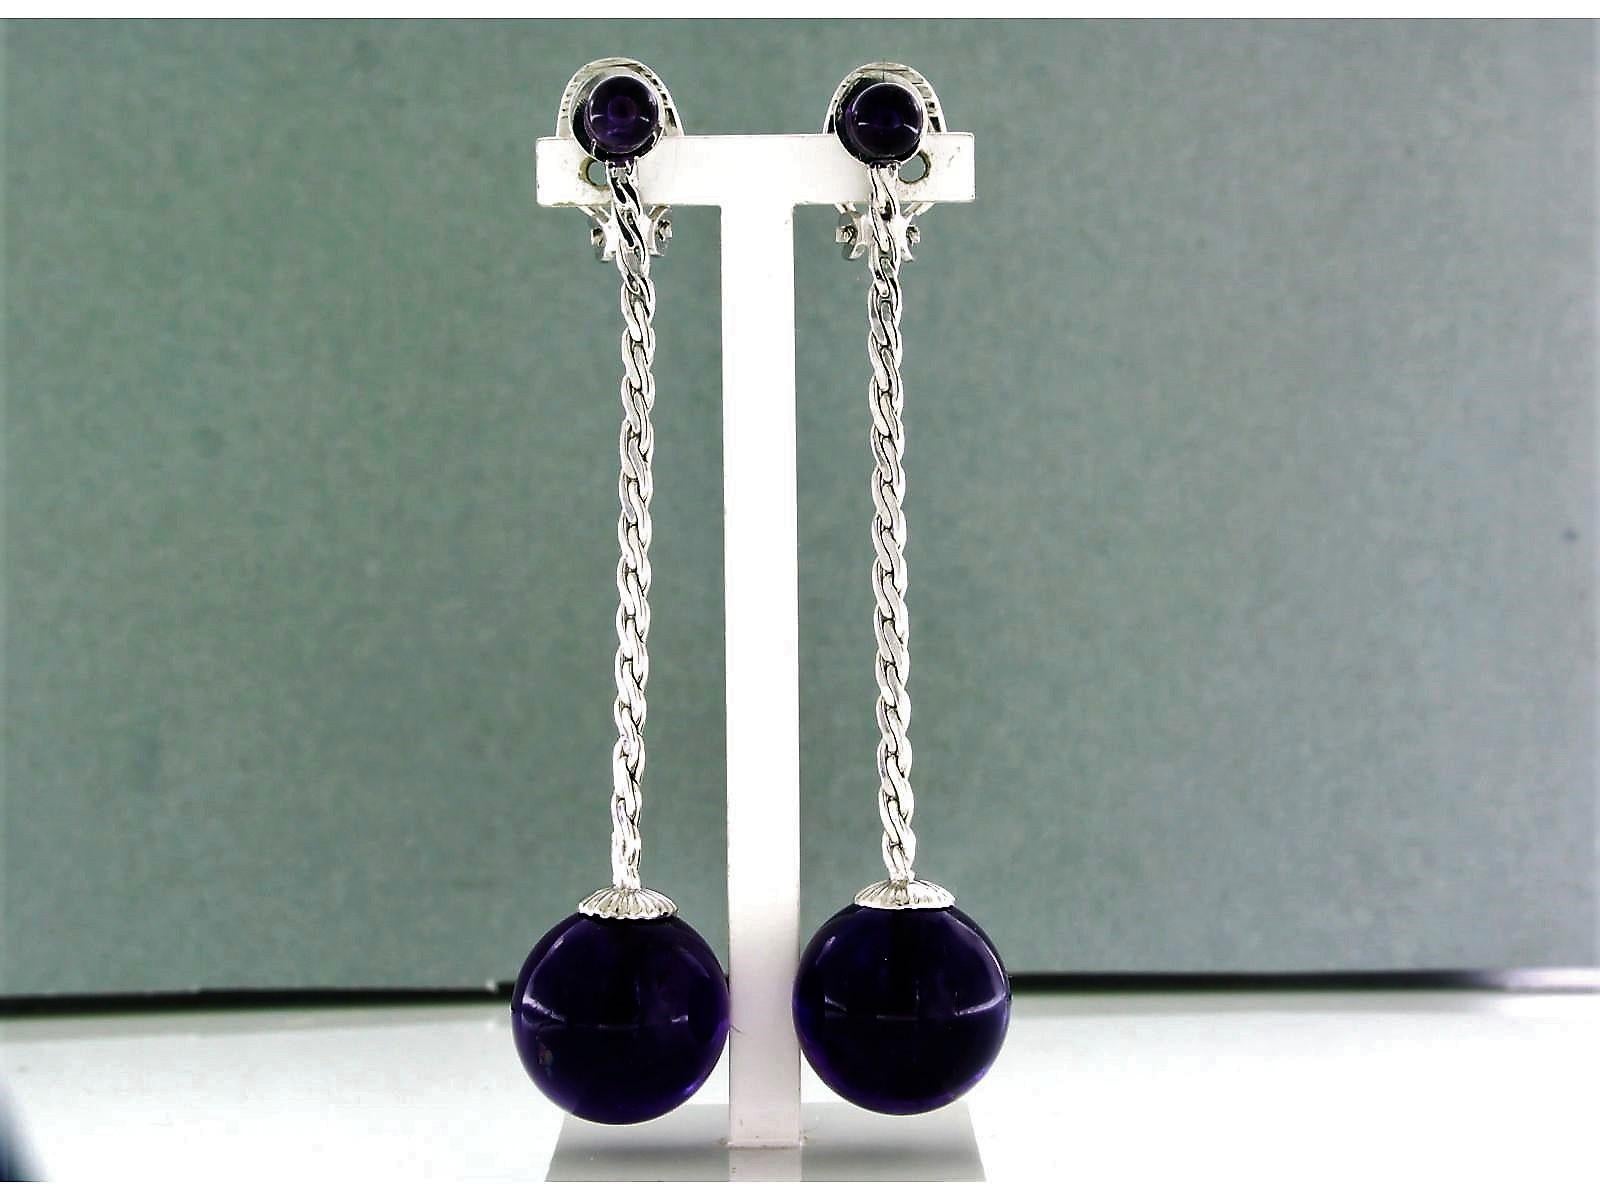 14k white gold earrings set with amethyst - 7.0 cm x 1.5 cm

detailed description:

the size of the earrings is 7.0 cm by 1.5 cm wide

weight 11.2 grams

set with

- 2 x 5.0 mm round cut amethyst

- 6 x 1.5 cm round cut amethyst

color Purple
purity